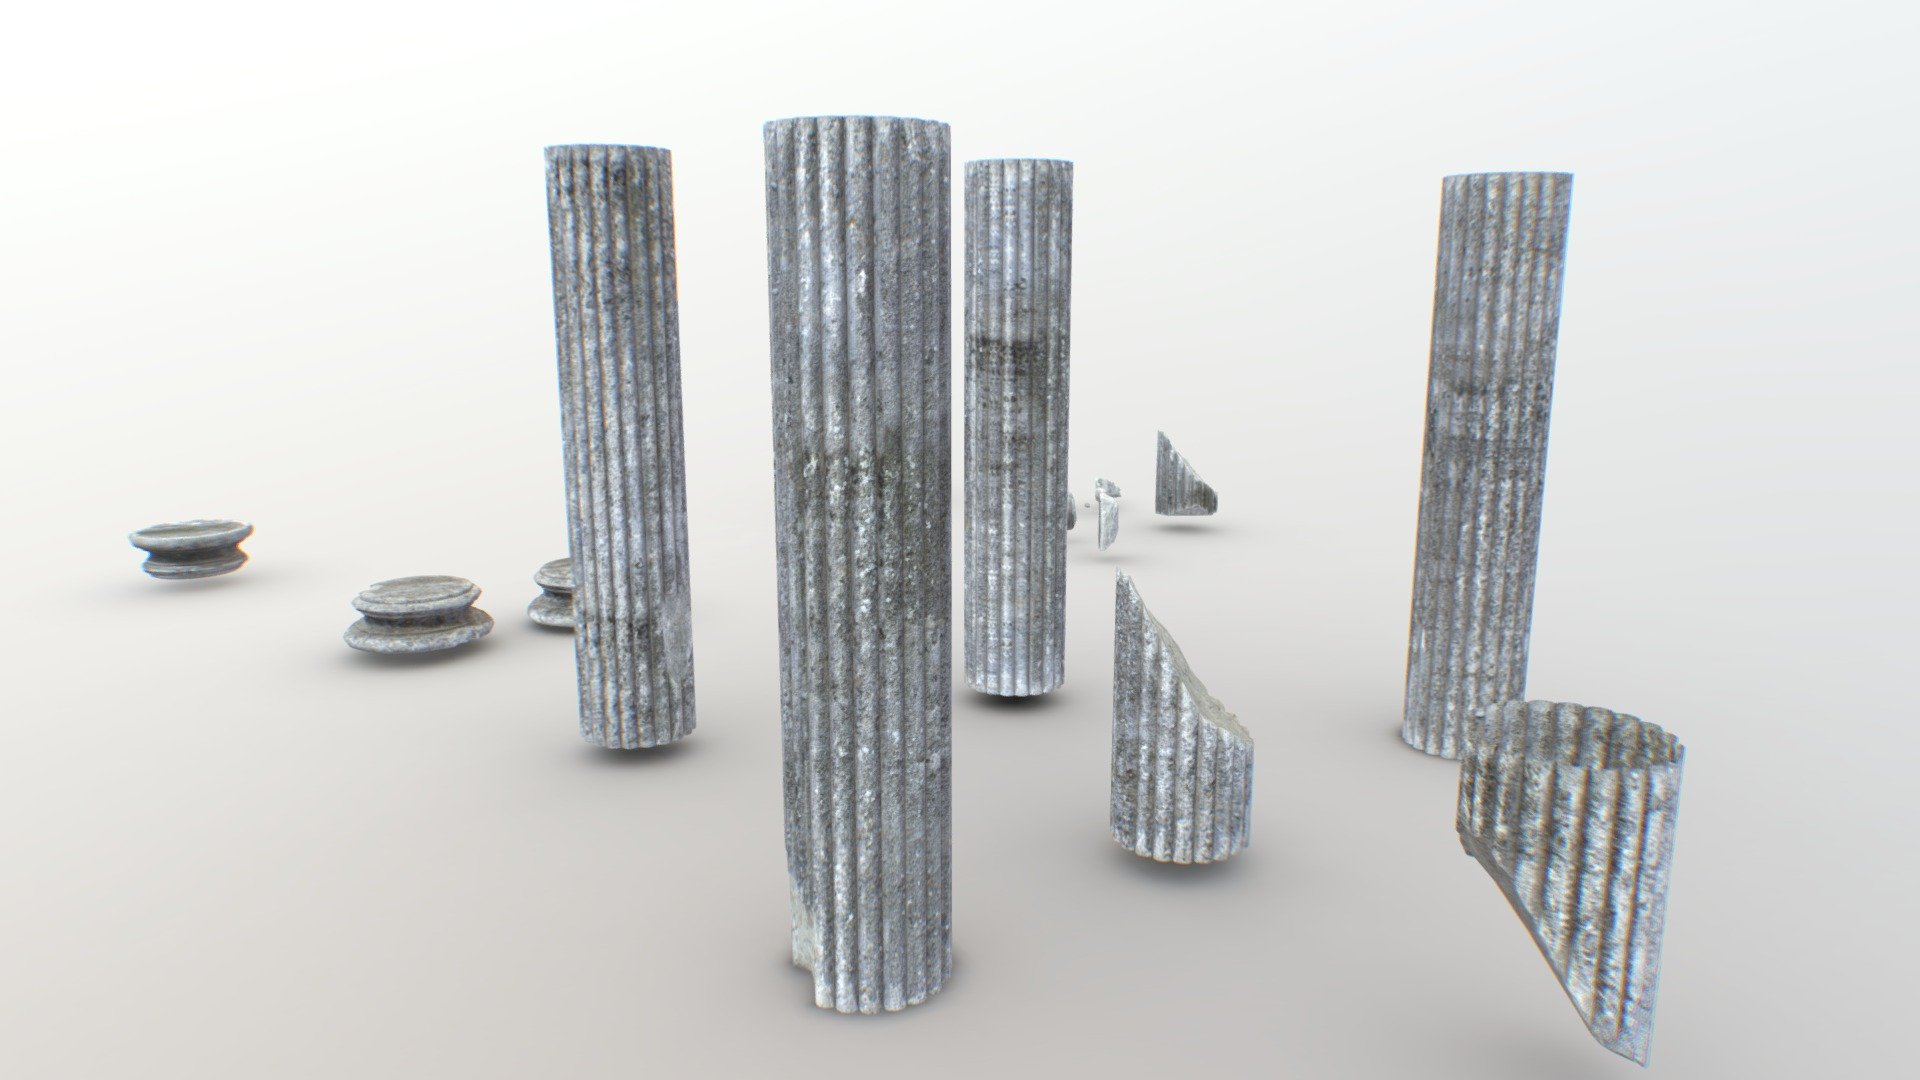 9 Old Columns pieces that you can exchange for different columns combinations. Also comes with various broken parts. Suitable for ruins, temples, castles, etc&hellip;

9 PBR Texture sets (28 textures) each including: Albedo, Normal, Roughness, Metalness

bases 500 polys
central column 500 polys
broken column 700 polys
broken parts 1700 to 150 polys - Old Columns Modular PBR - Buy Royalty Free 3D model by 32cm 3d model